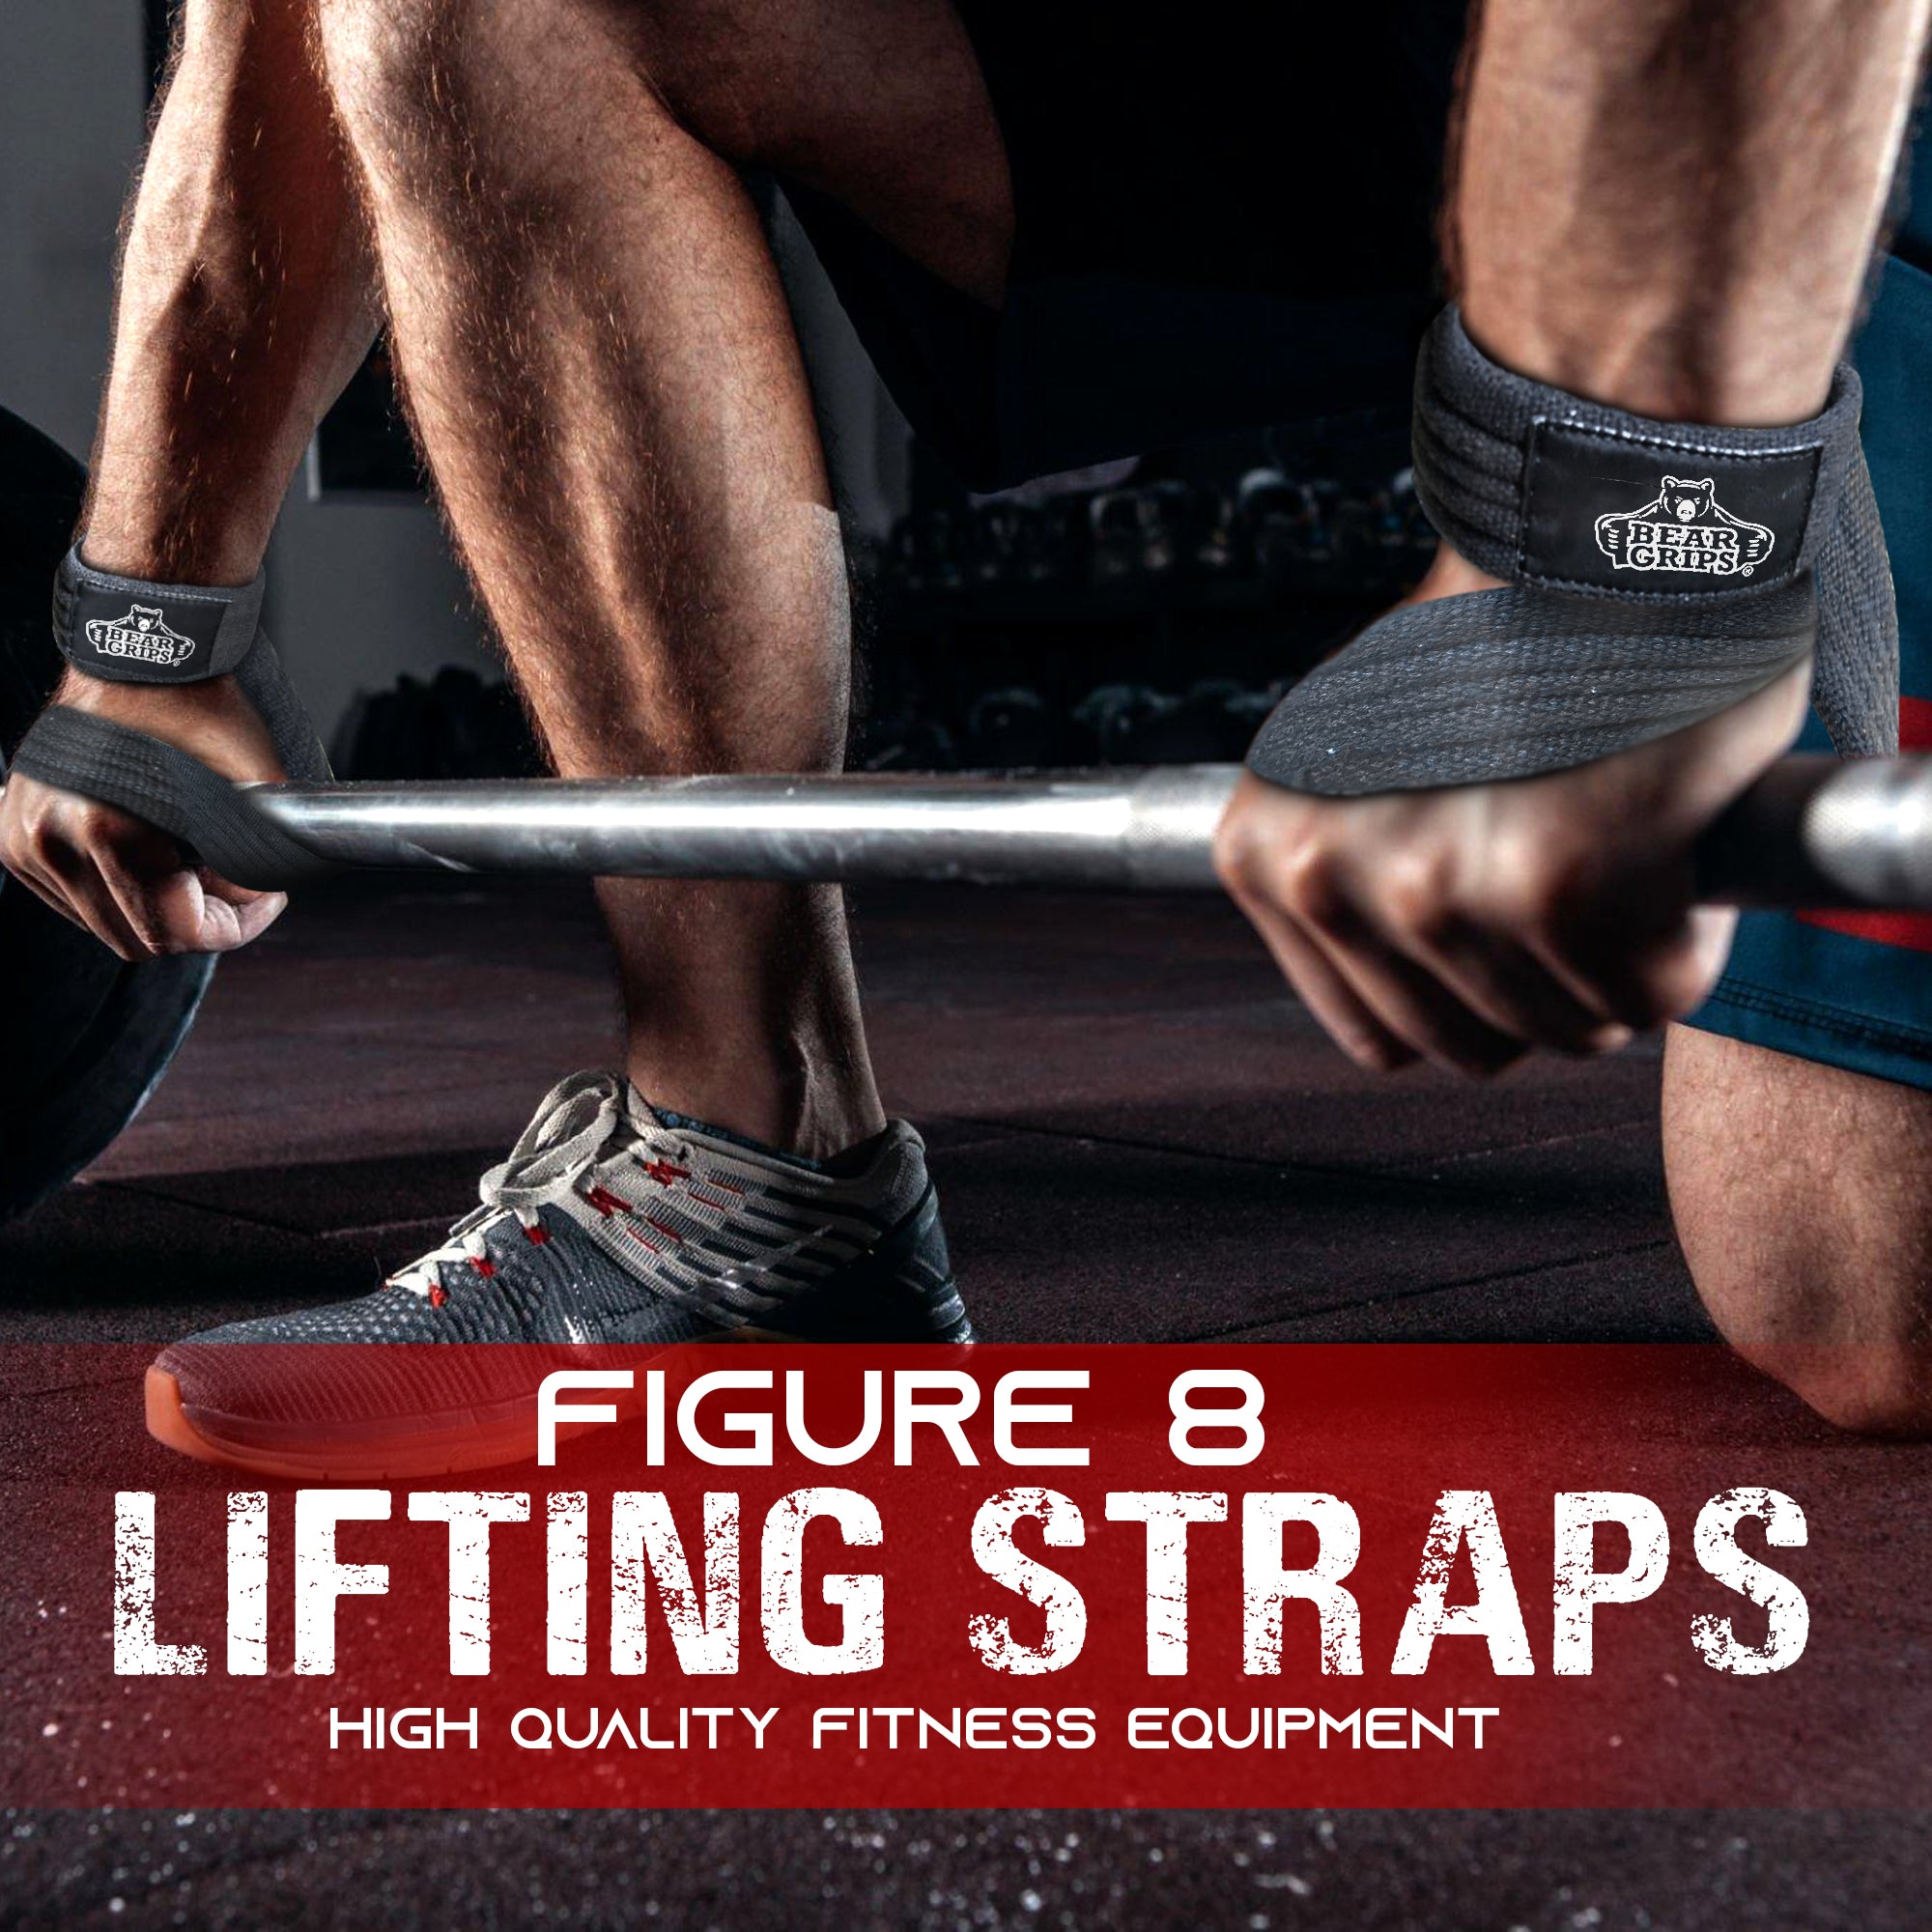 Harbinger Padded Lifting Straps for Weightlifting and Strength